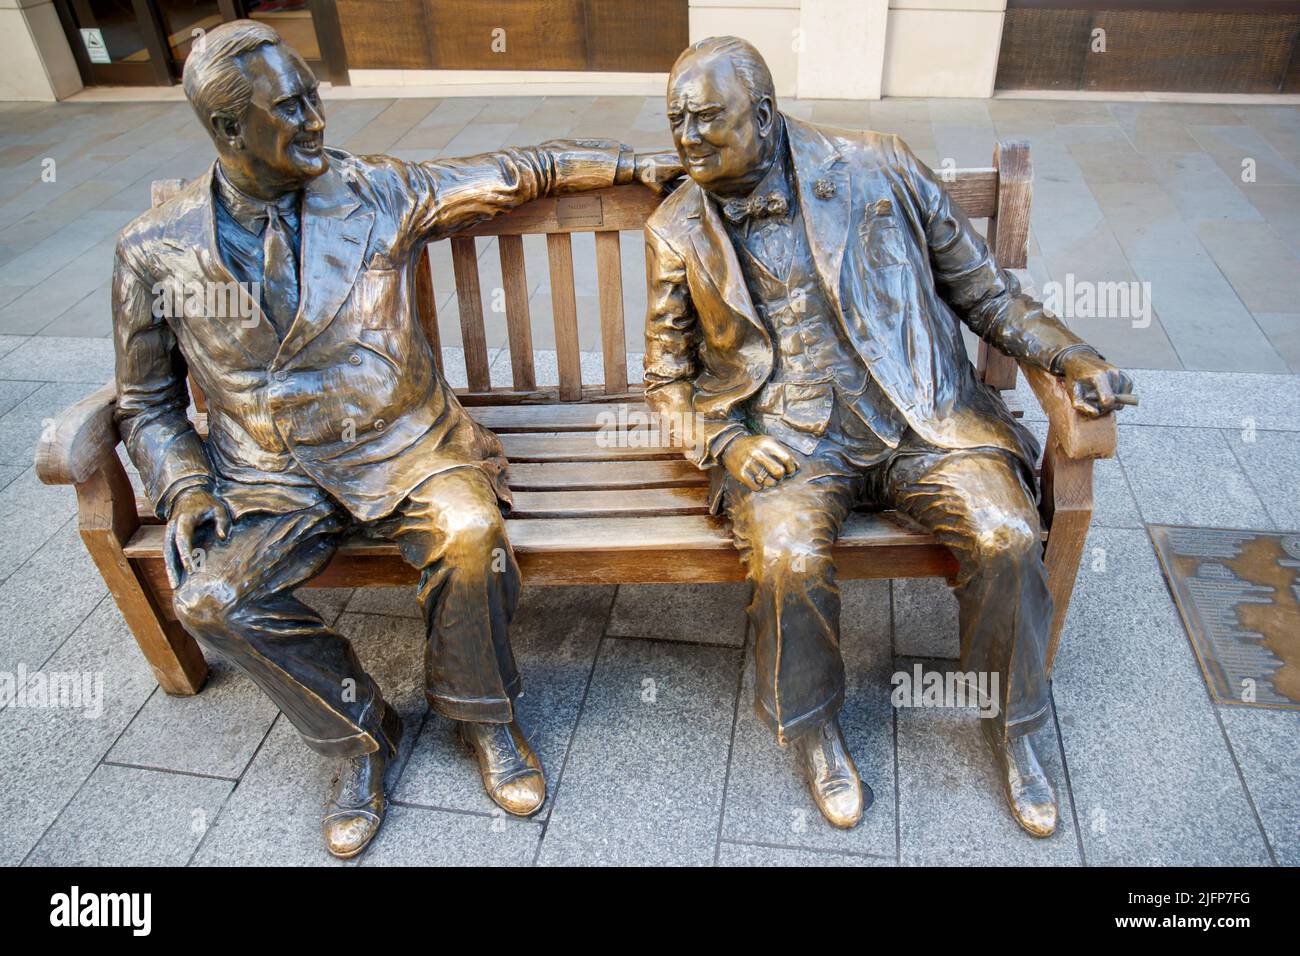 Bronze sculpture celebrating the relationship between Churchill and Roosevelt, New Bond Street, London, Saturday, May 28, 2022. Stock Photo